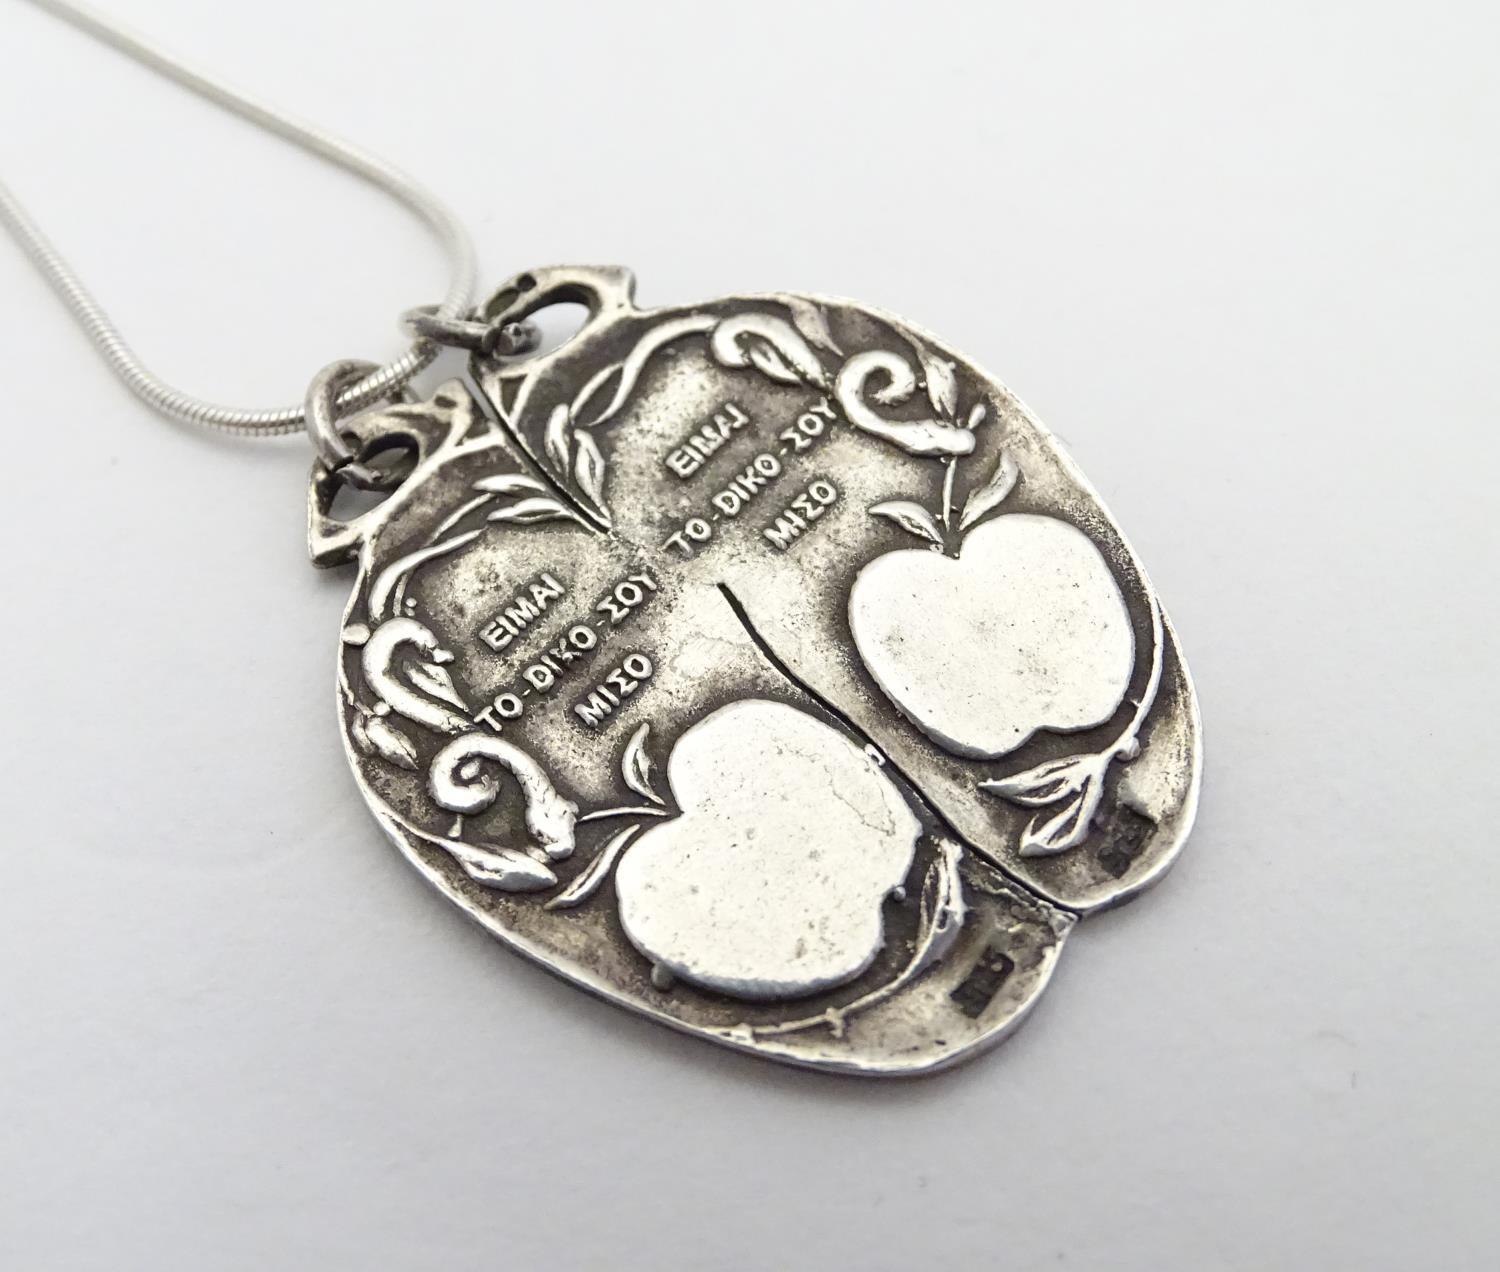 A silver pendant on chain, the pendant formed as an apple with a depiction of Adam and Eve. - Image 4 of 5